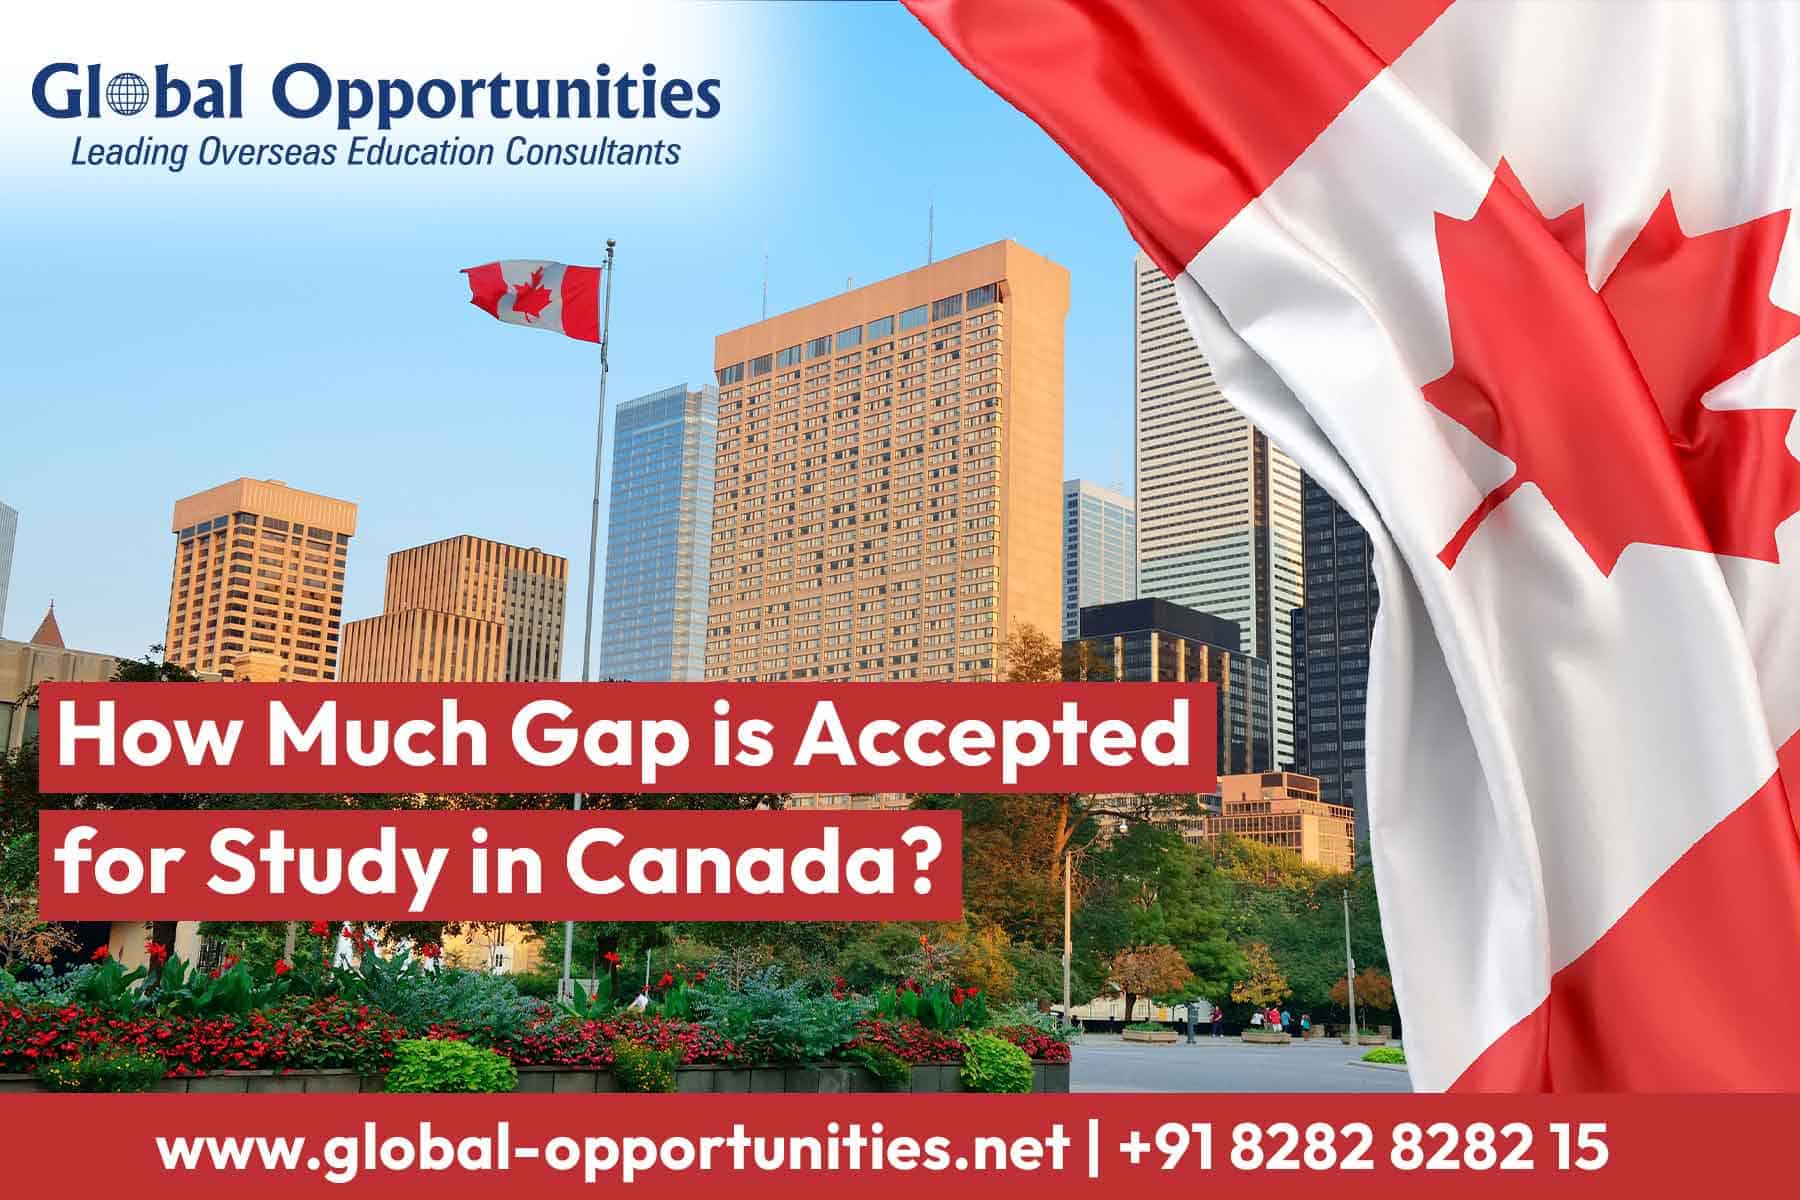 How Much Gap is Accepted for Study in Canada?